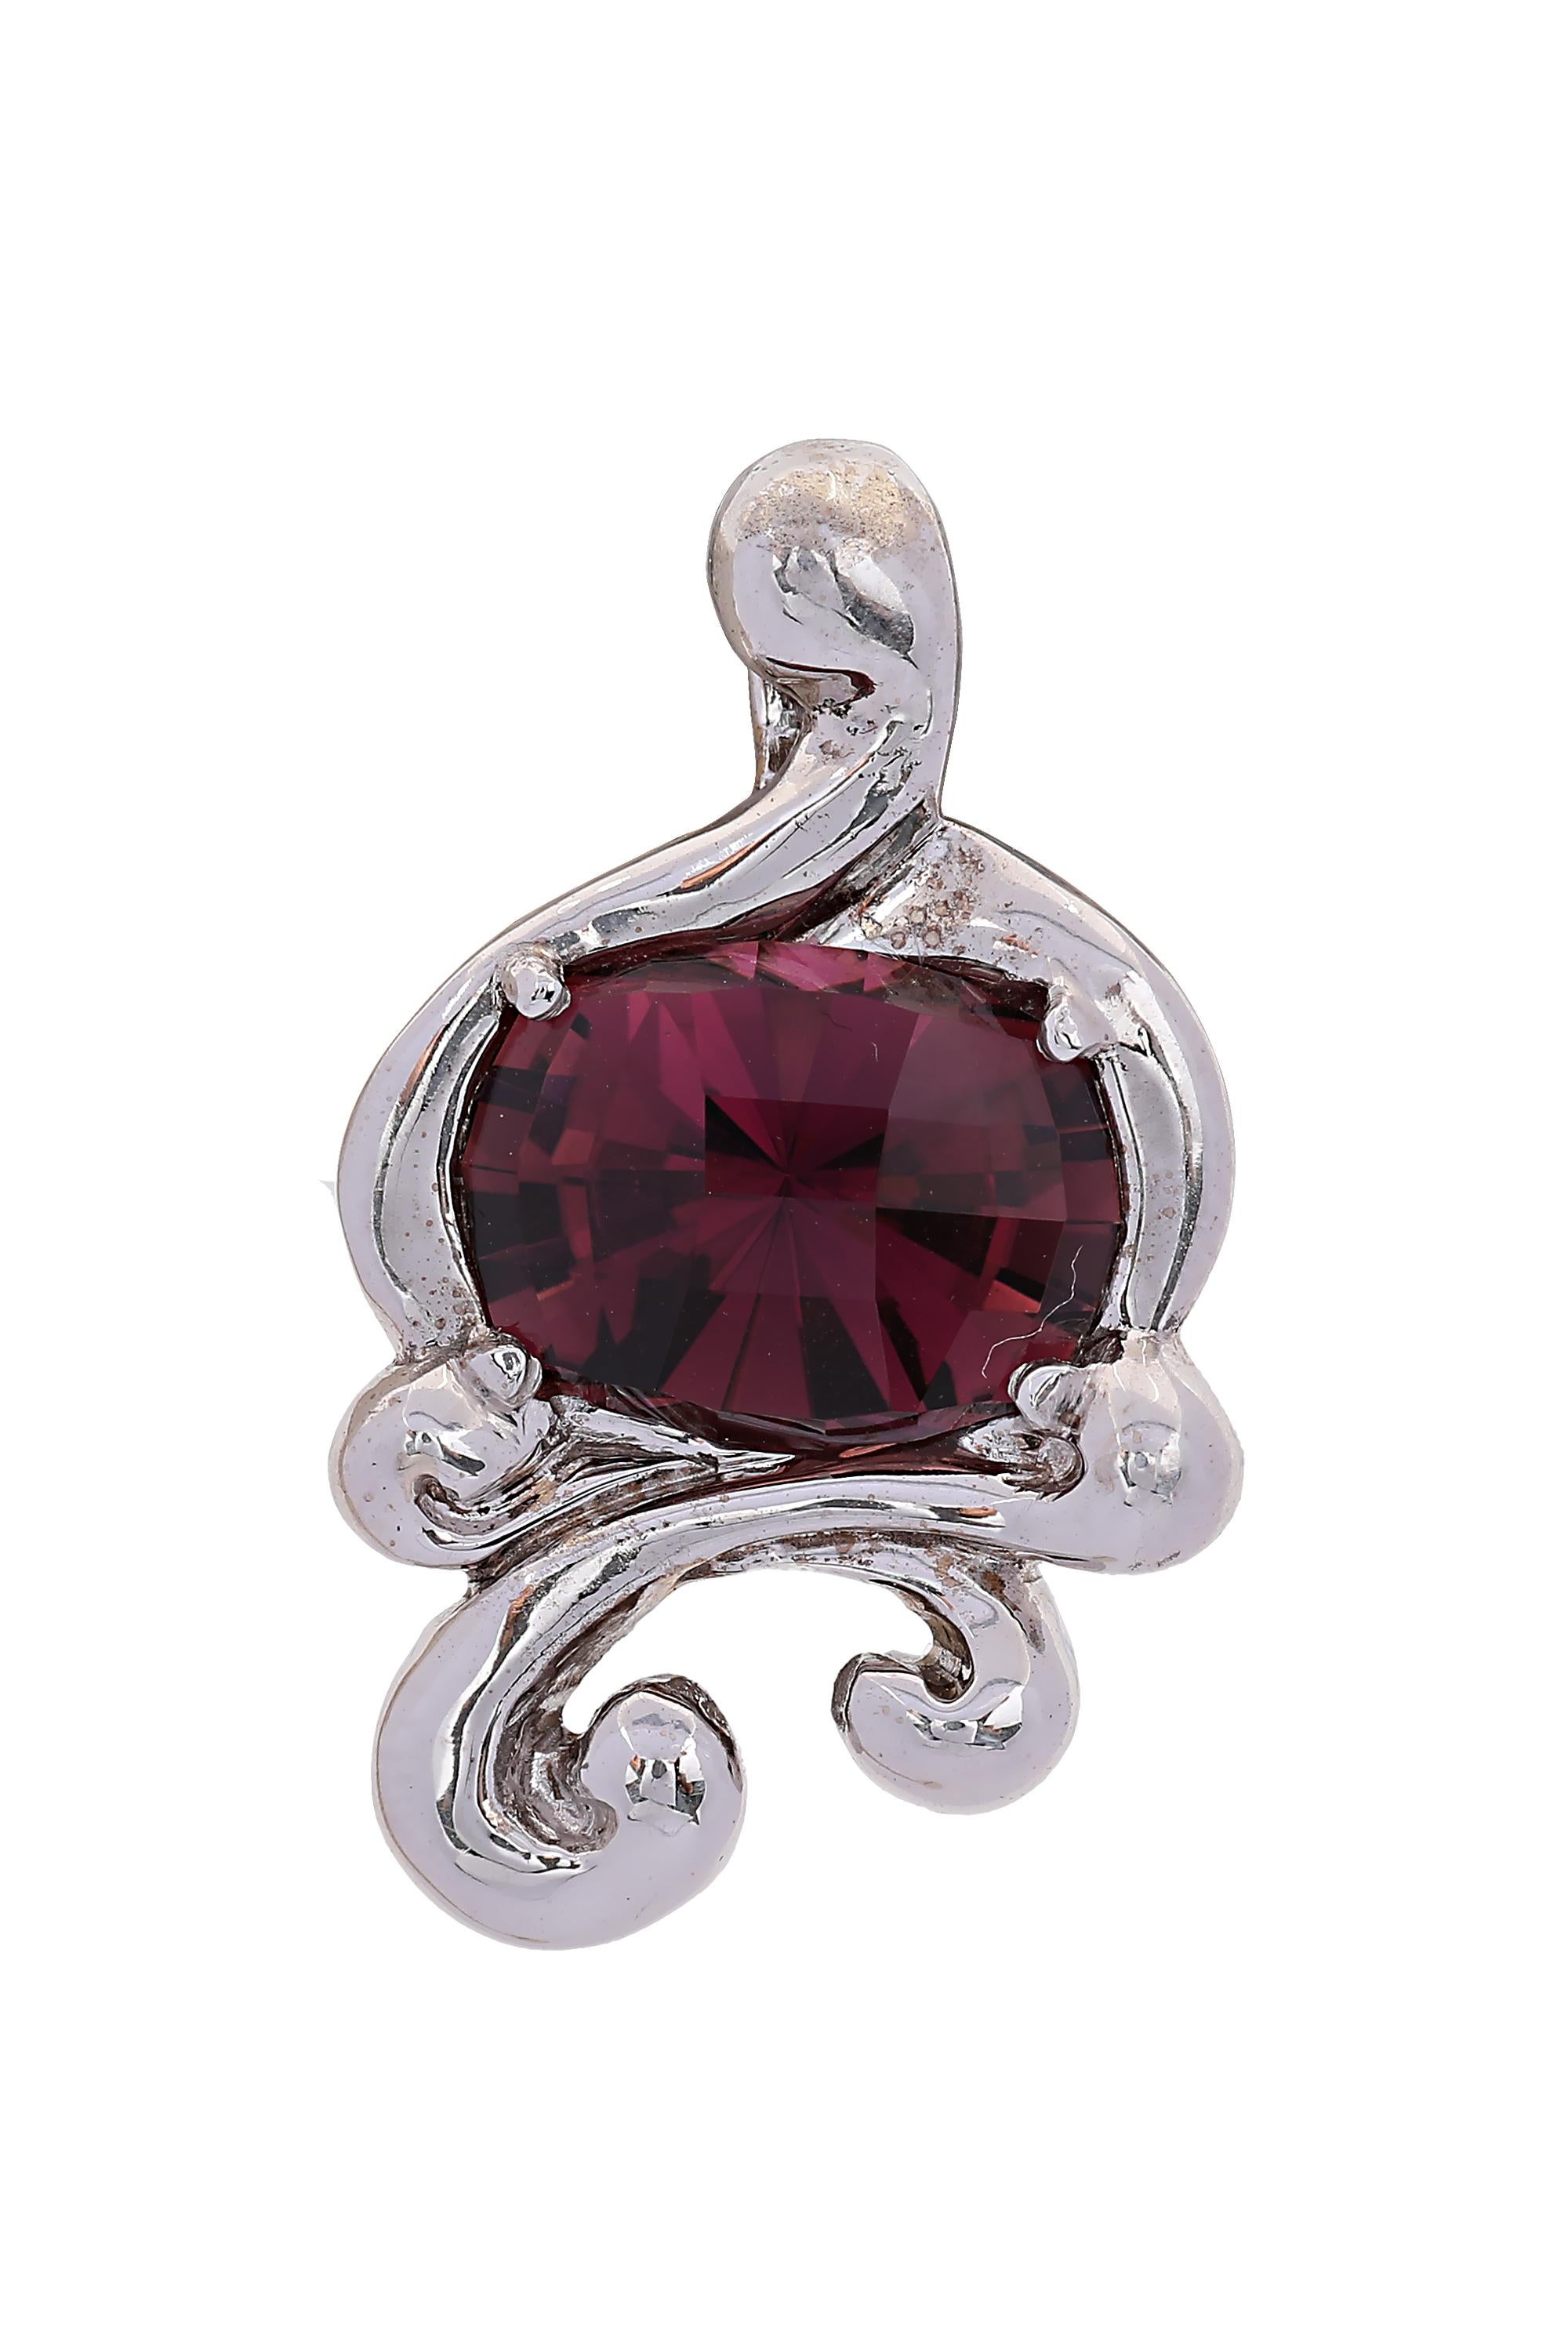 10 Carat Pink Tourmaline Swirl Modern Pendant 14K White Gold In Good Condition For Sale In beverly hills, CA